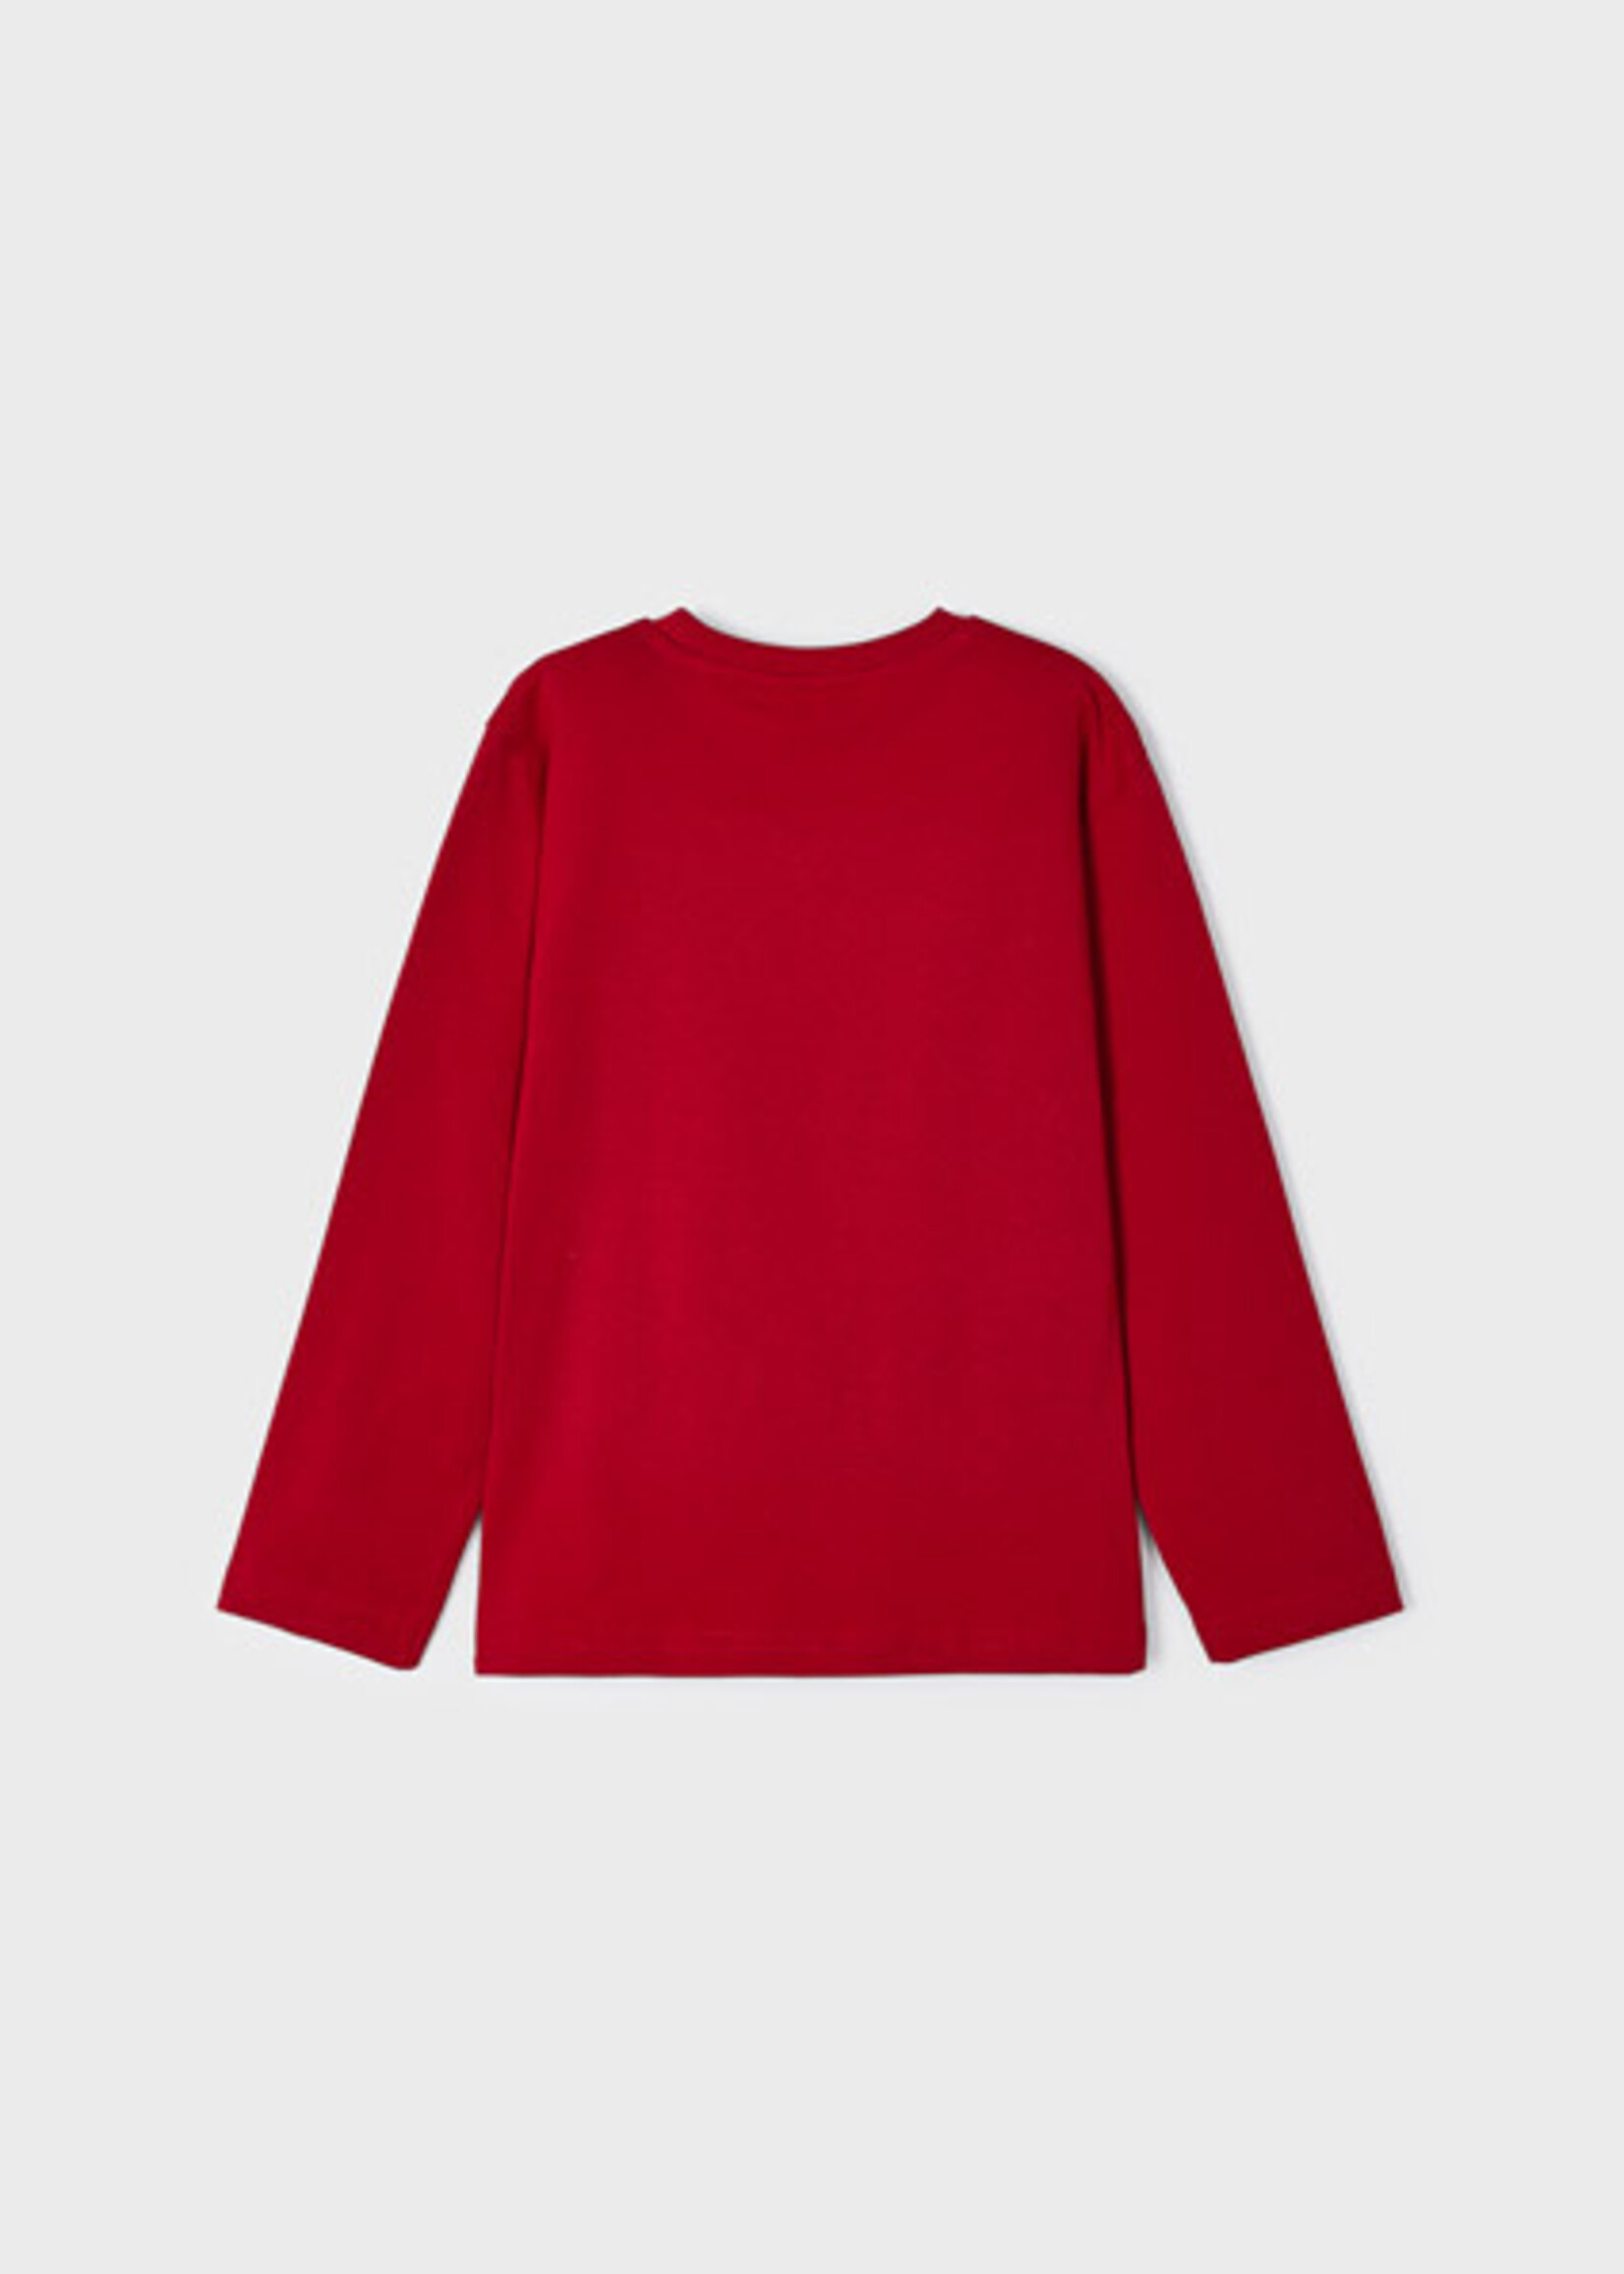 Mayoral 4018 L/s t-shirt                   Red